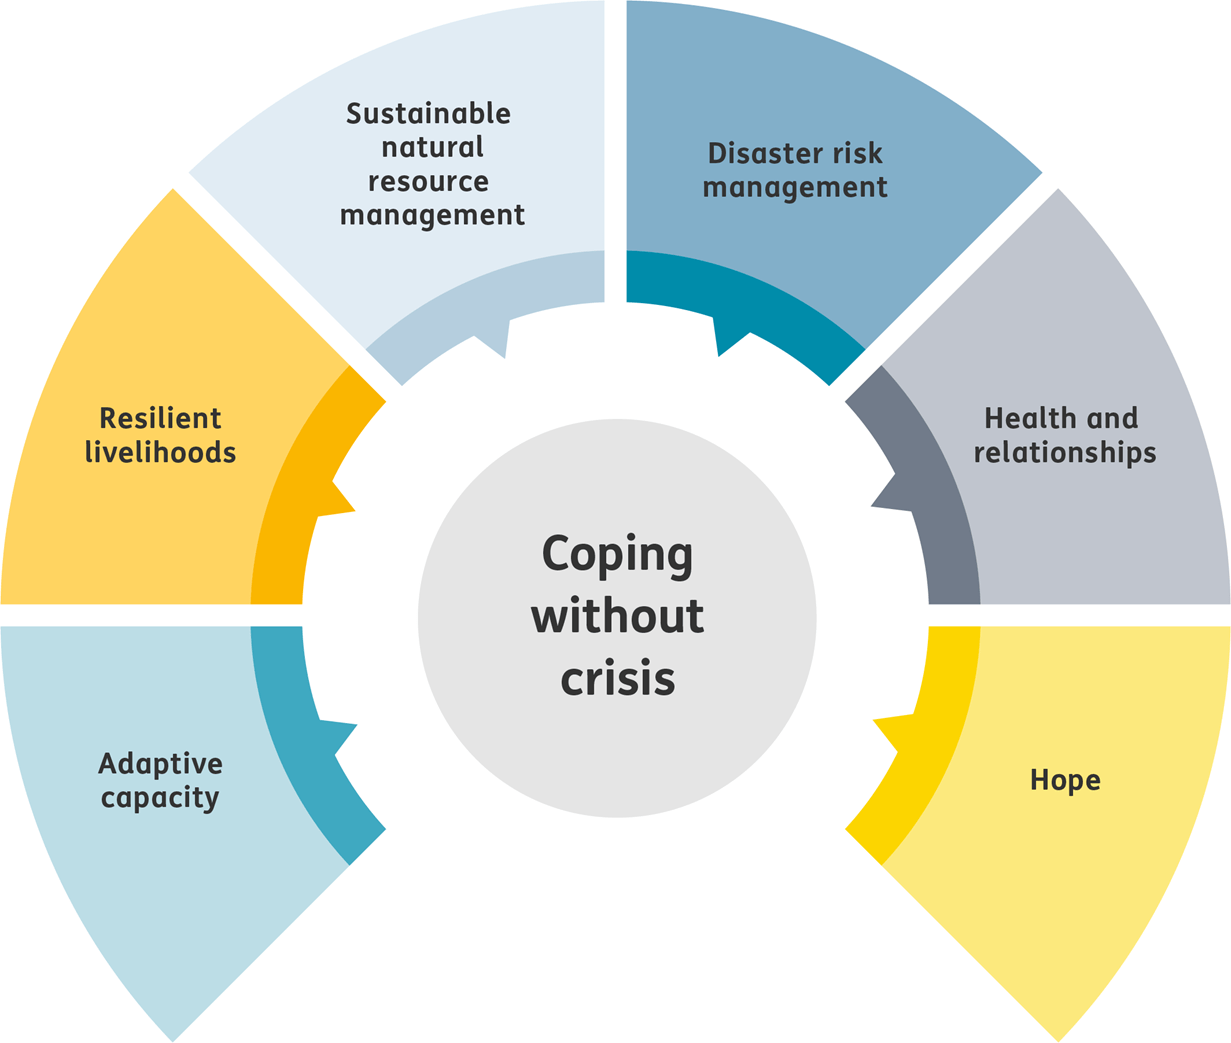 Coping without crisis